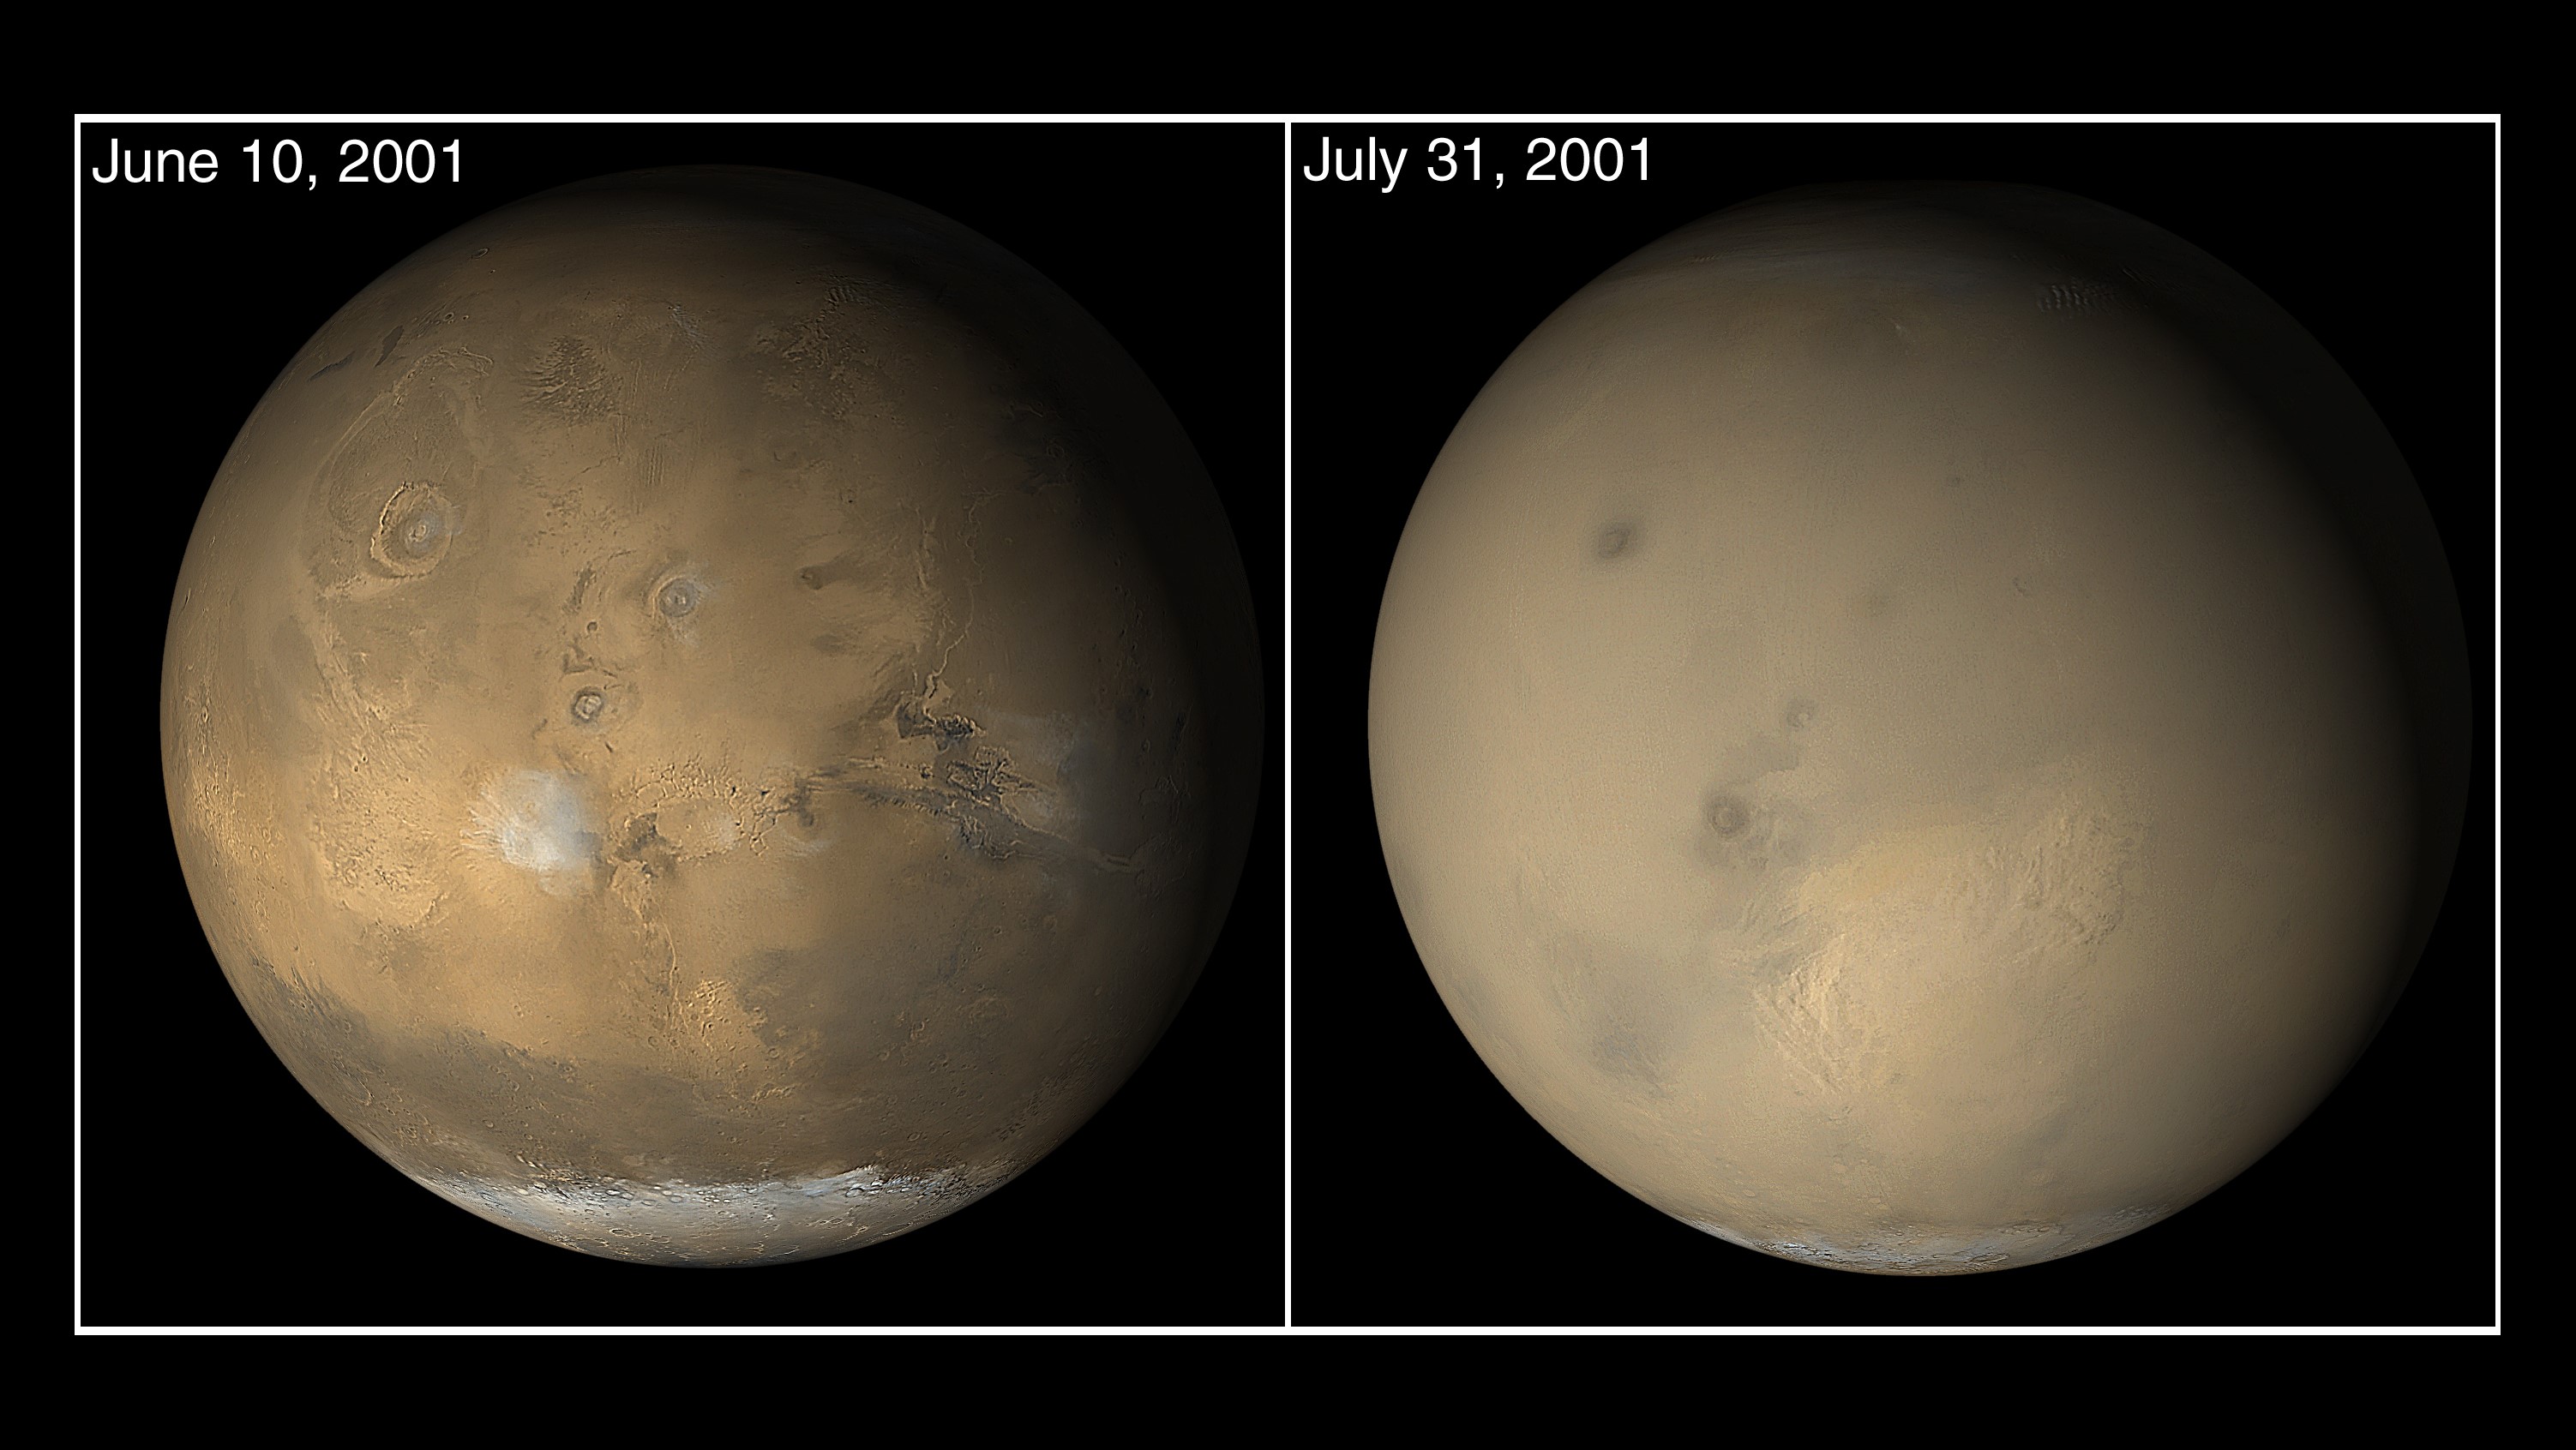 A clear view of the Martian surface compared to a dust storm view in which features are blurred out.